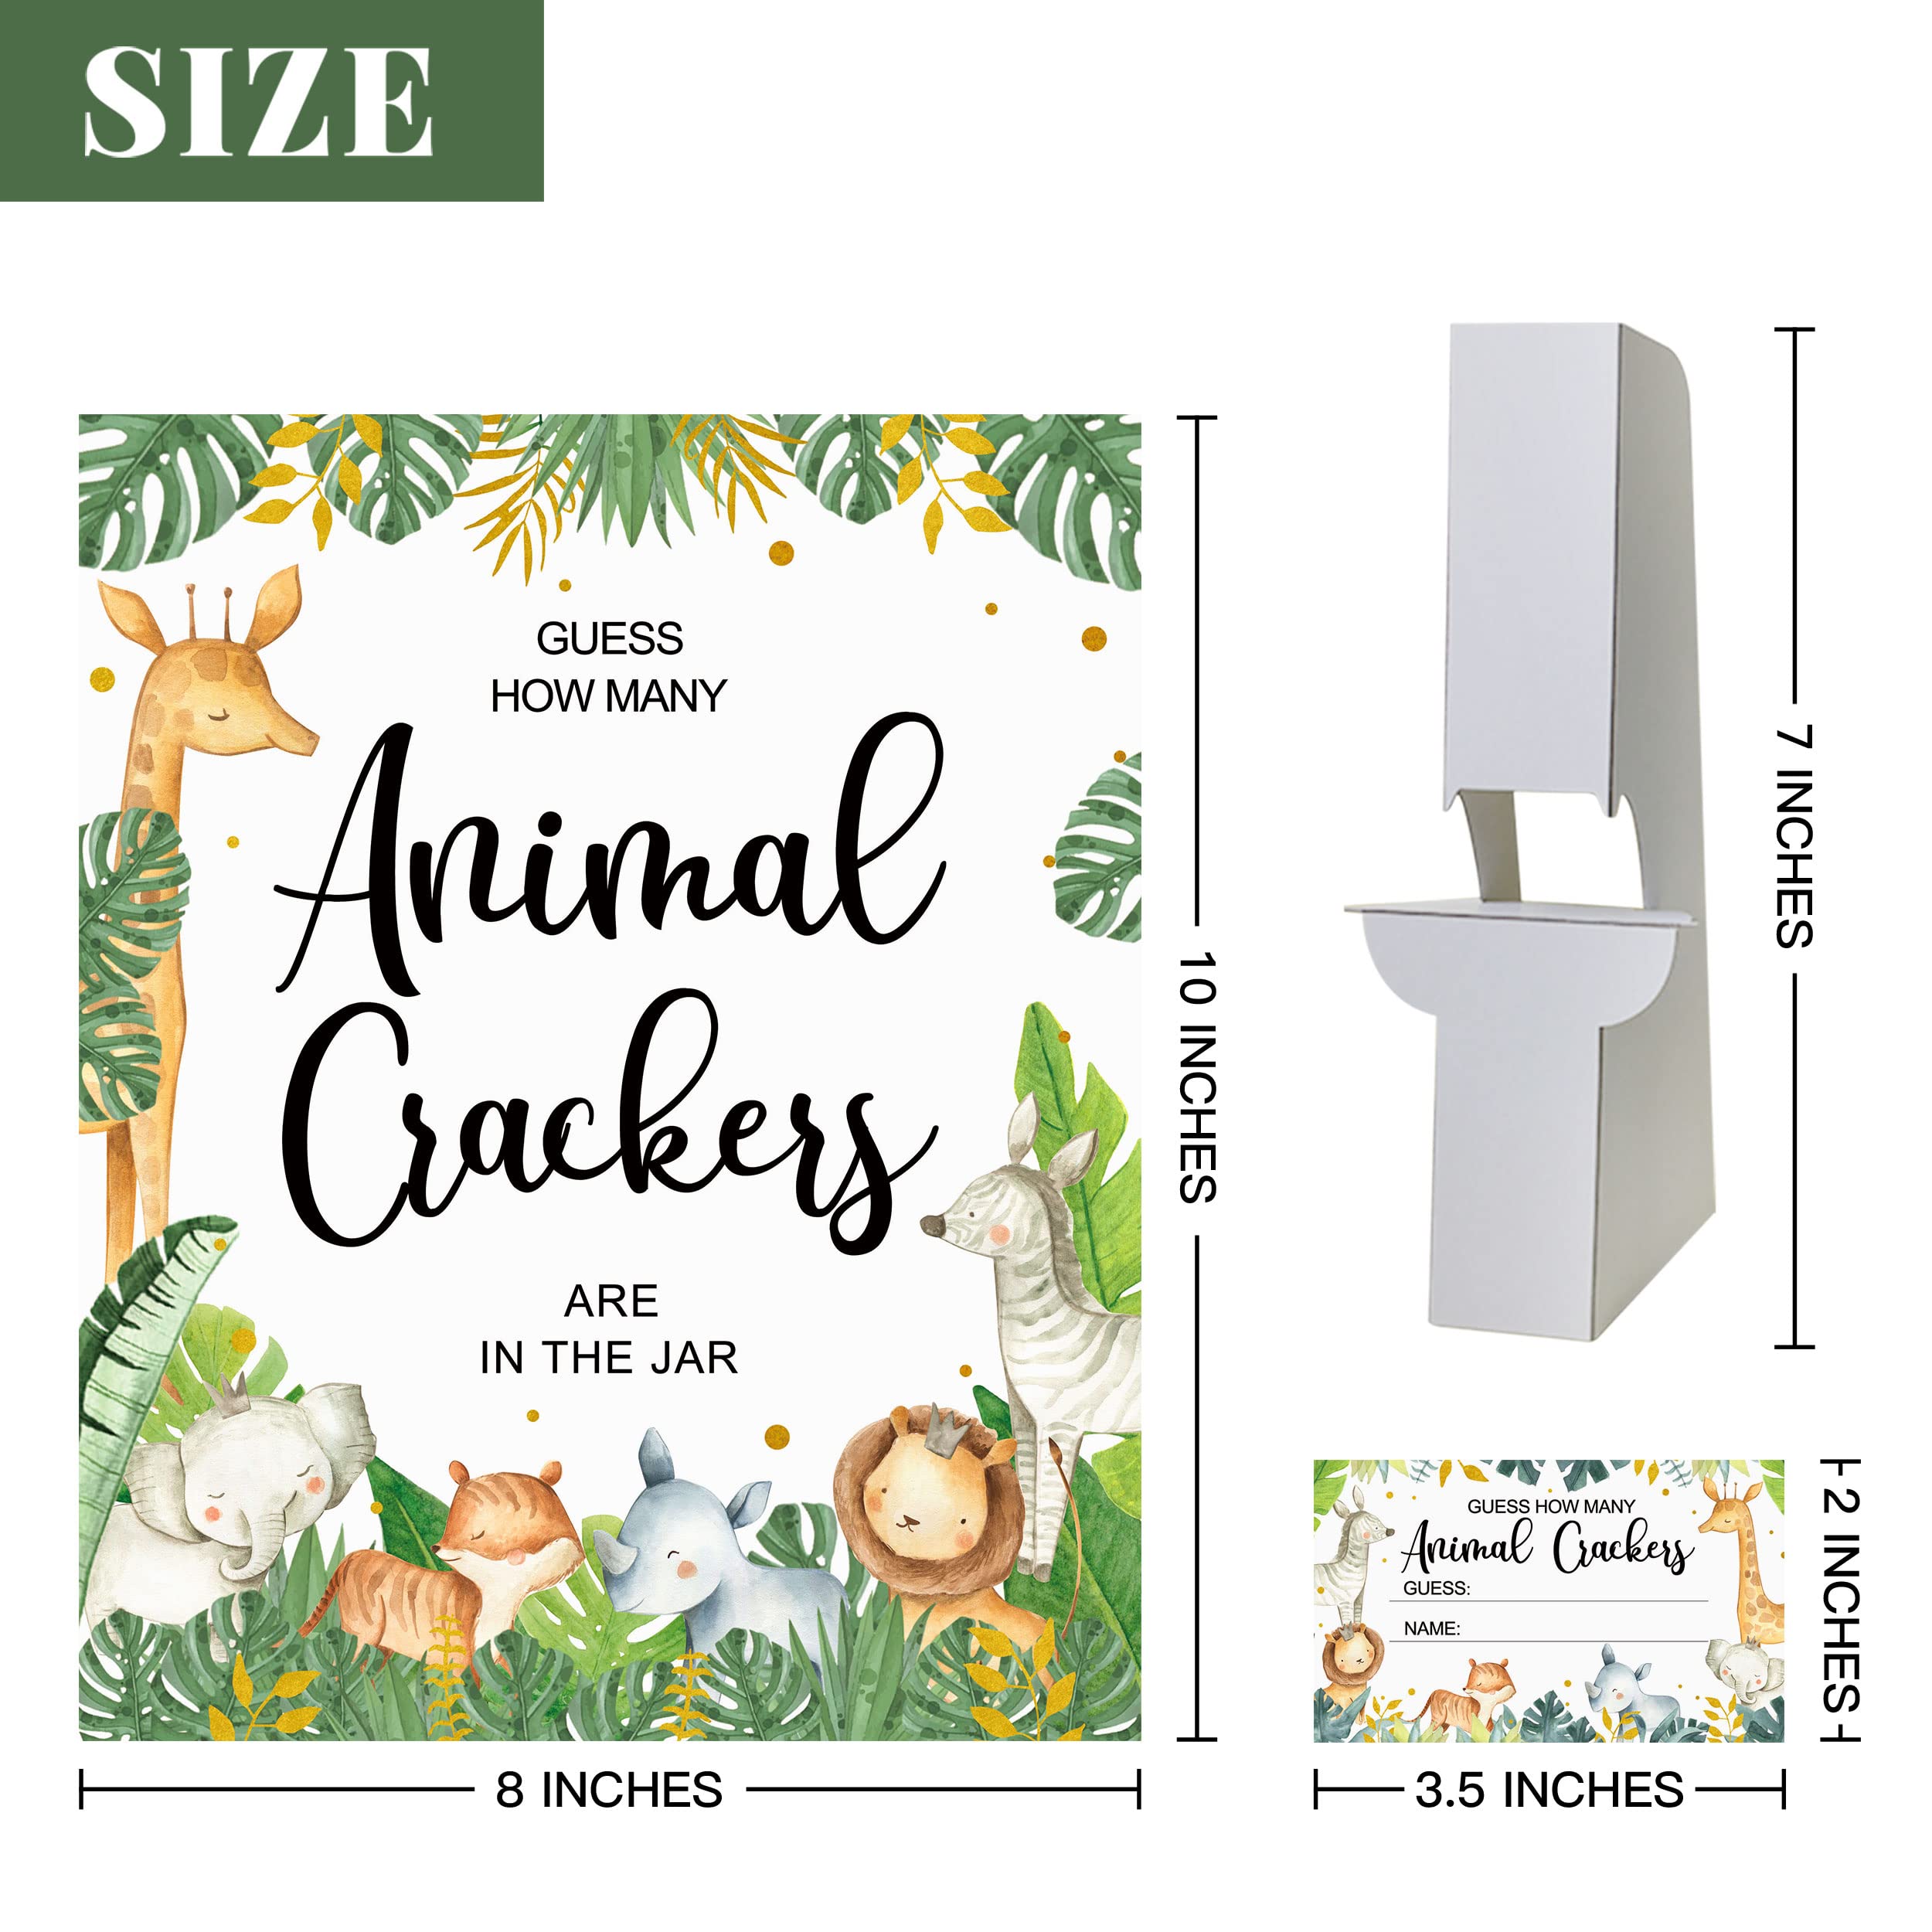 50 Safari Baby Shower Games, Safari Guess How Many Animal Crackers Game Cards with Sign, Jungle Baby Shower Games, Candy Guessing Game Tickets Safari Baby Shower Decorations(2x3.5 Inches)